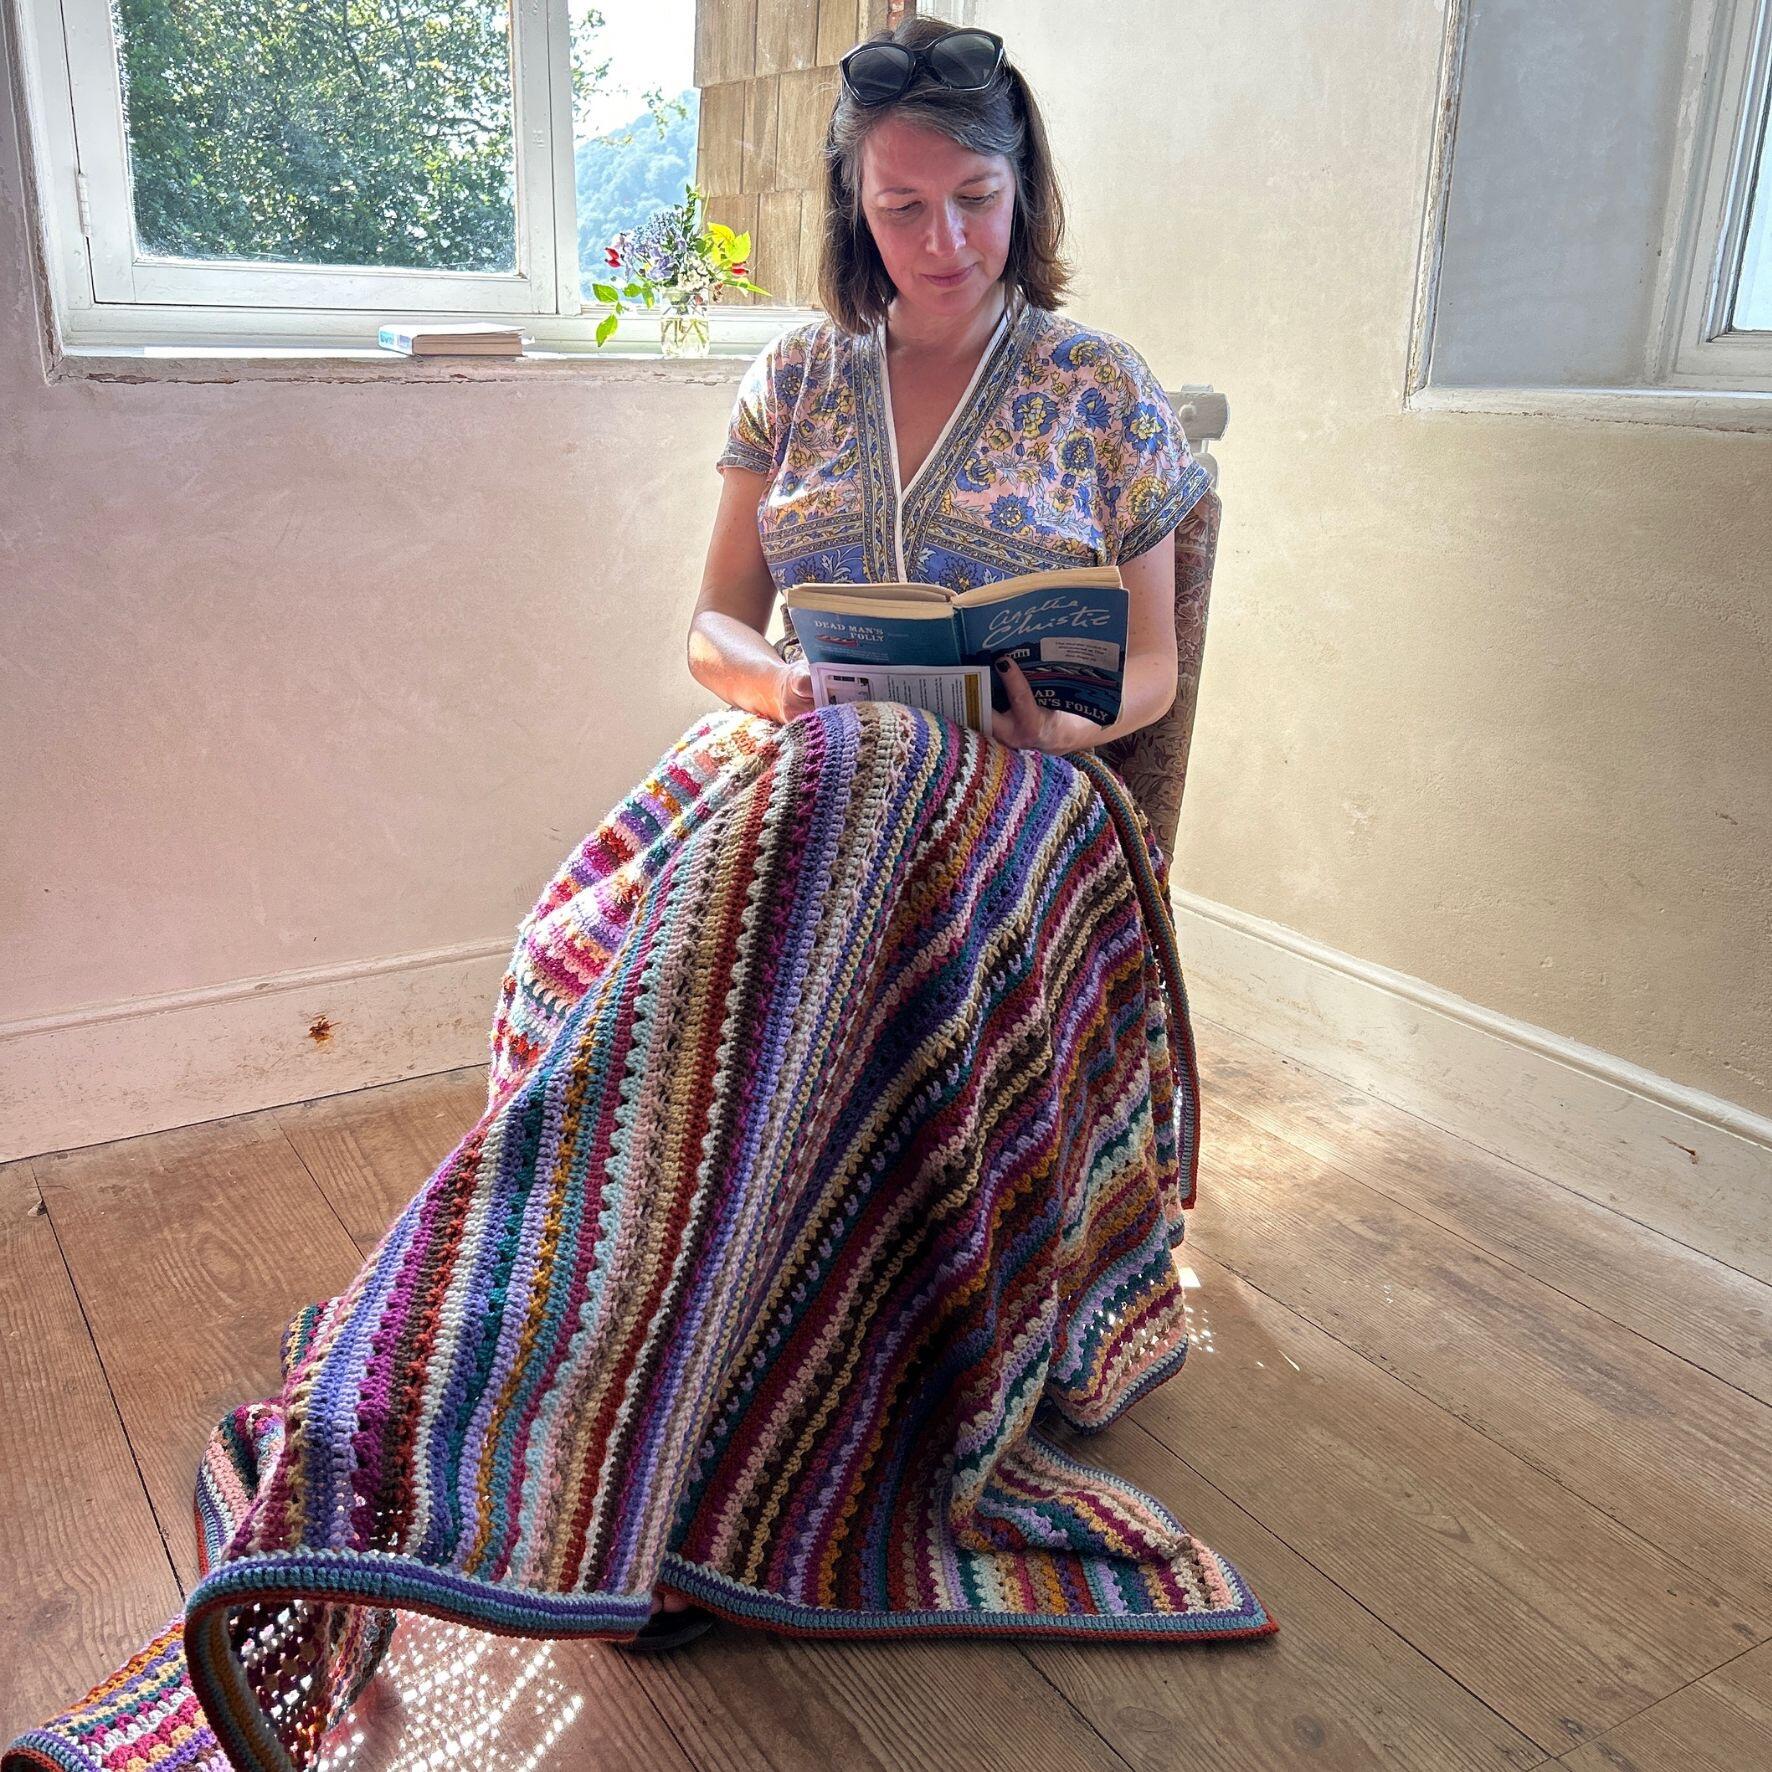 Anja sitting on Agatha Christie's chair with the greenway blanket and reading a book